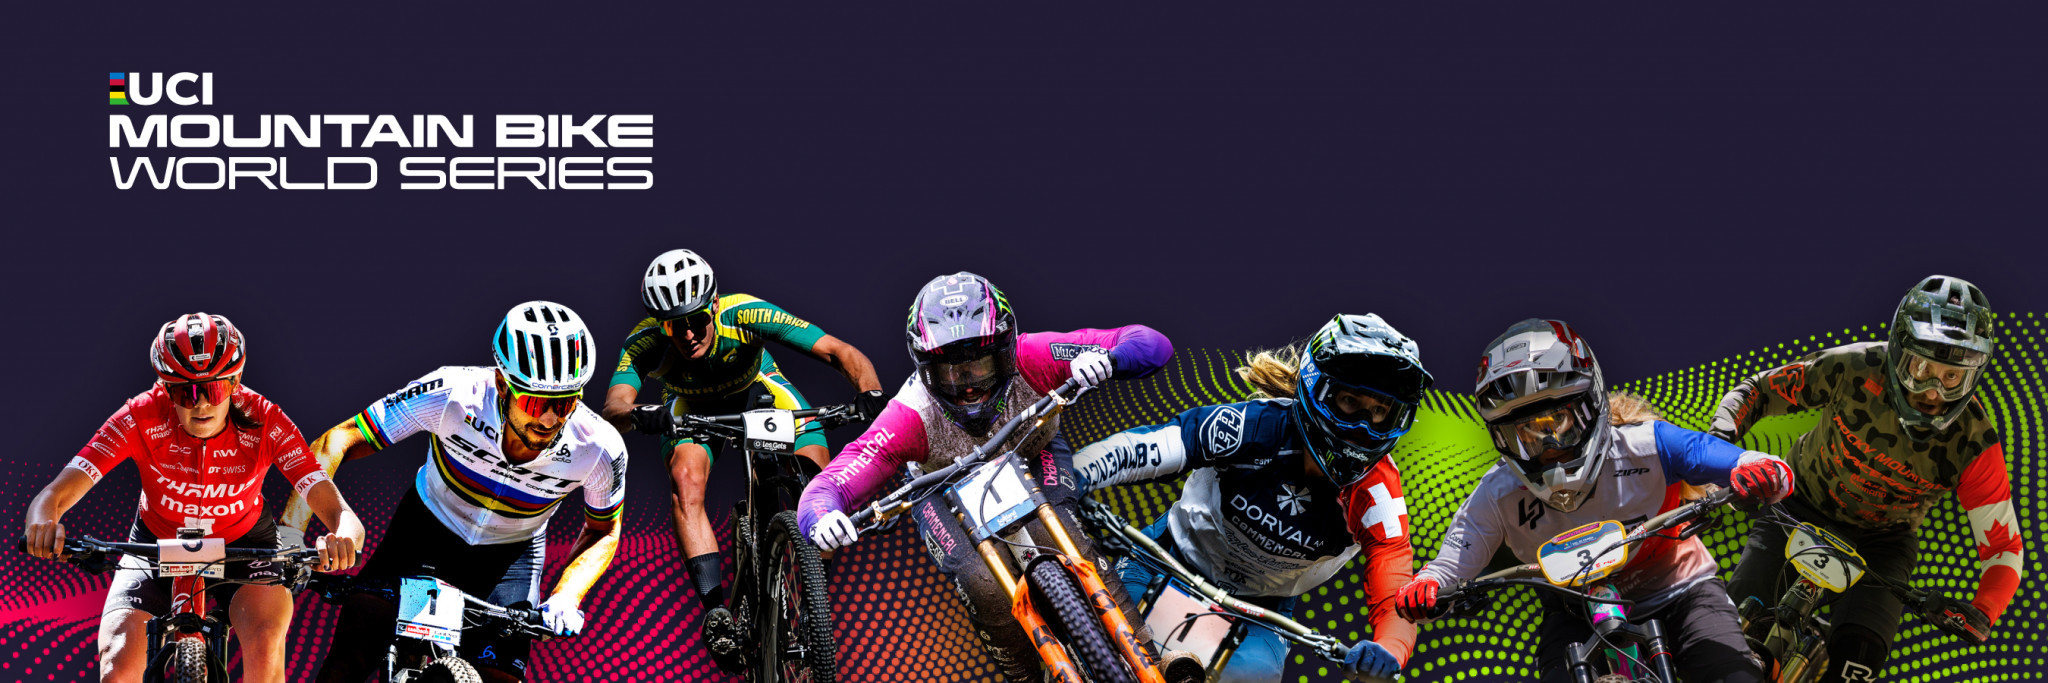 The UCI Mountain Bike World Series has been launched ©UCI